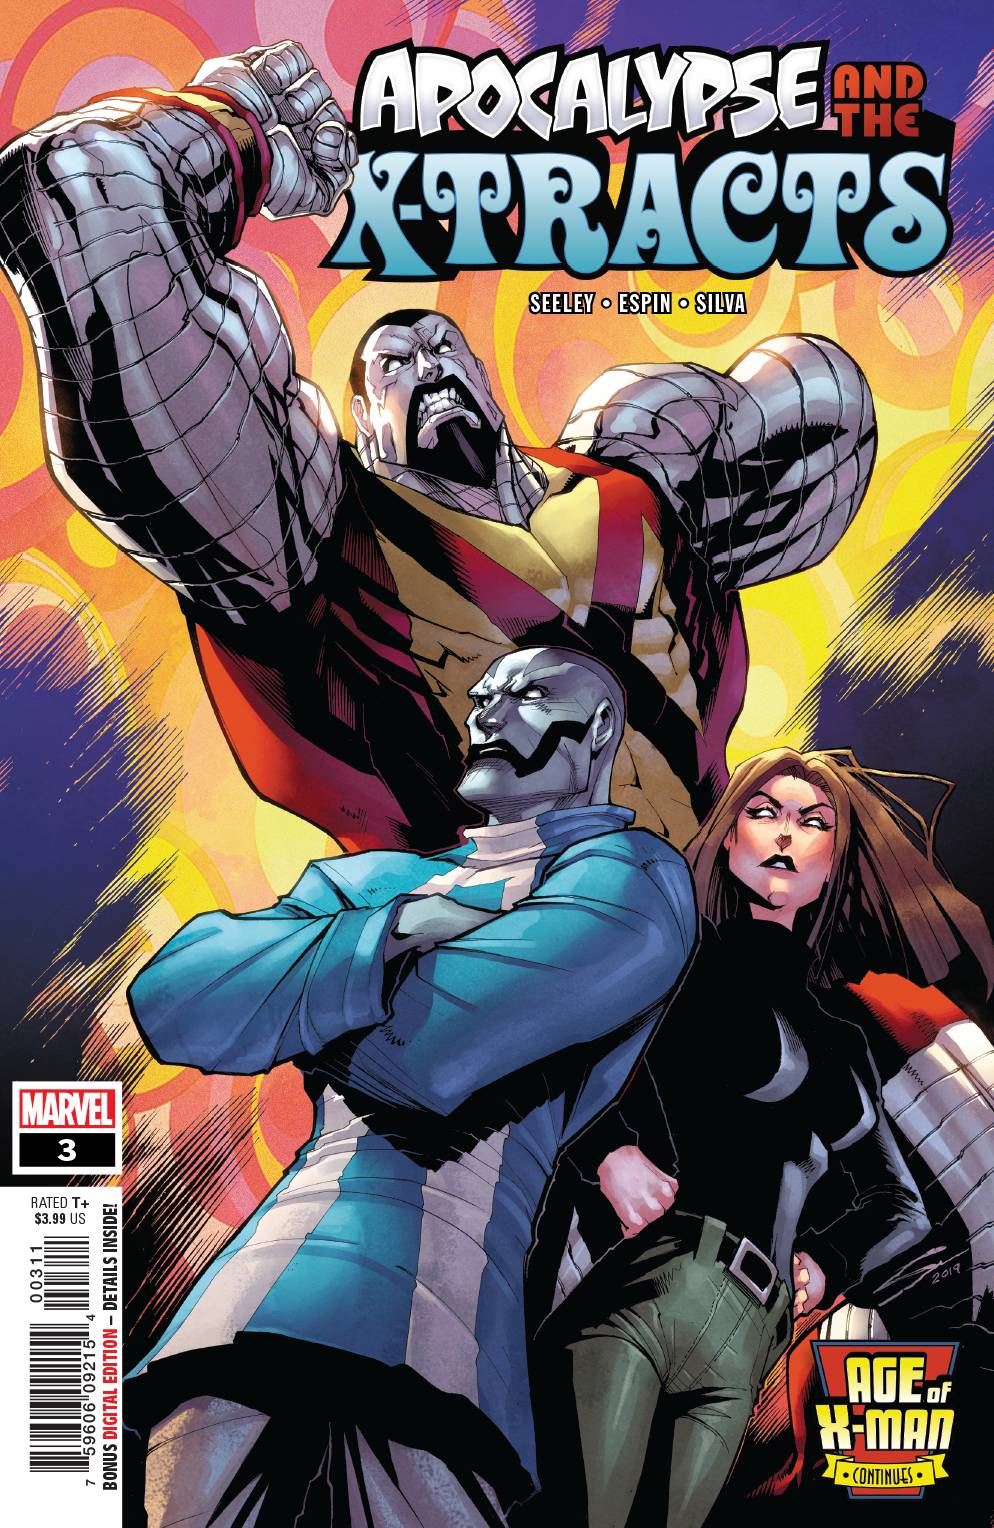 AGE OF X-MAN APOCALYPSE AND X-TRACTS #3 (OF 5) 05/08/19 FOC 04/15/19